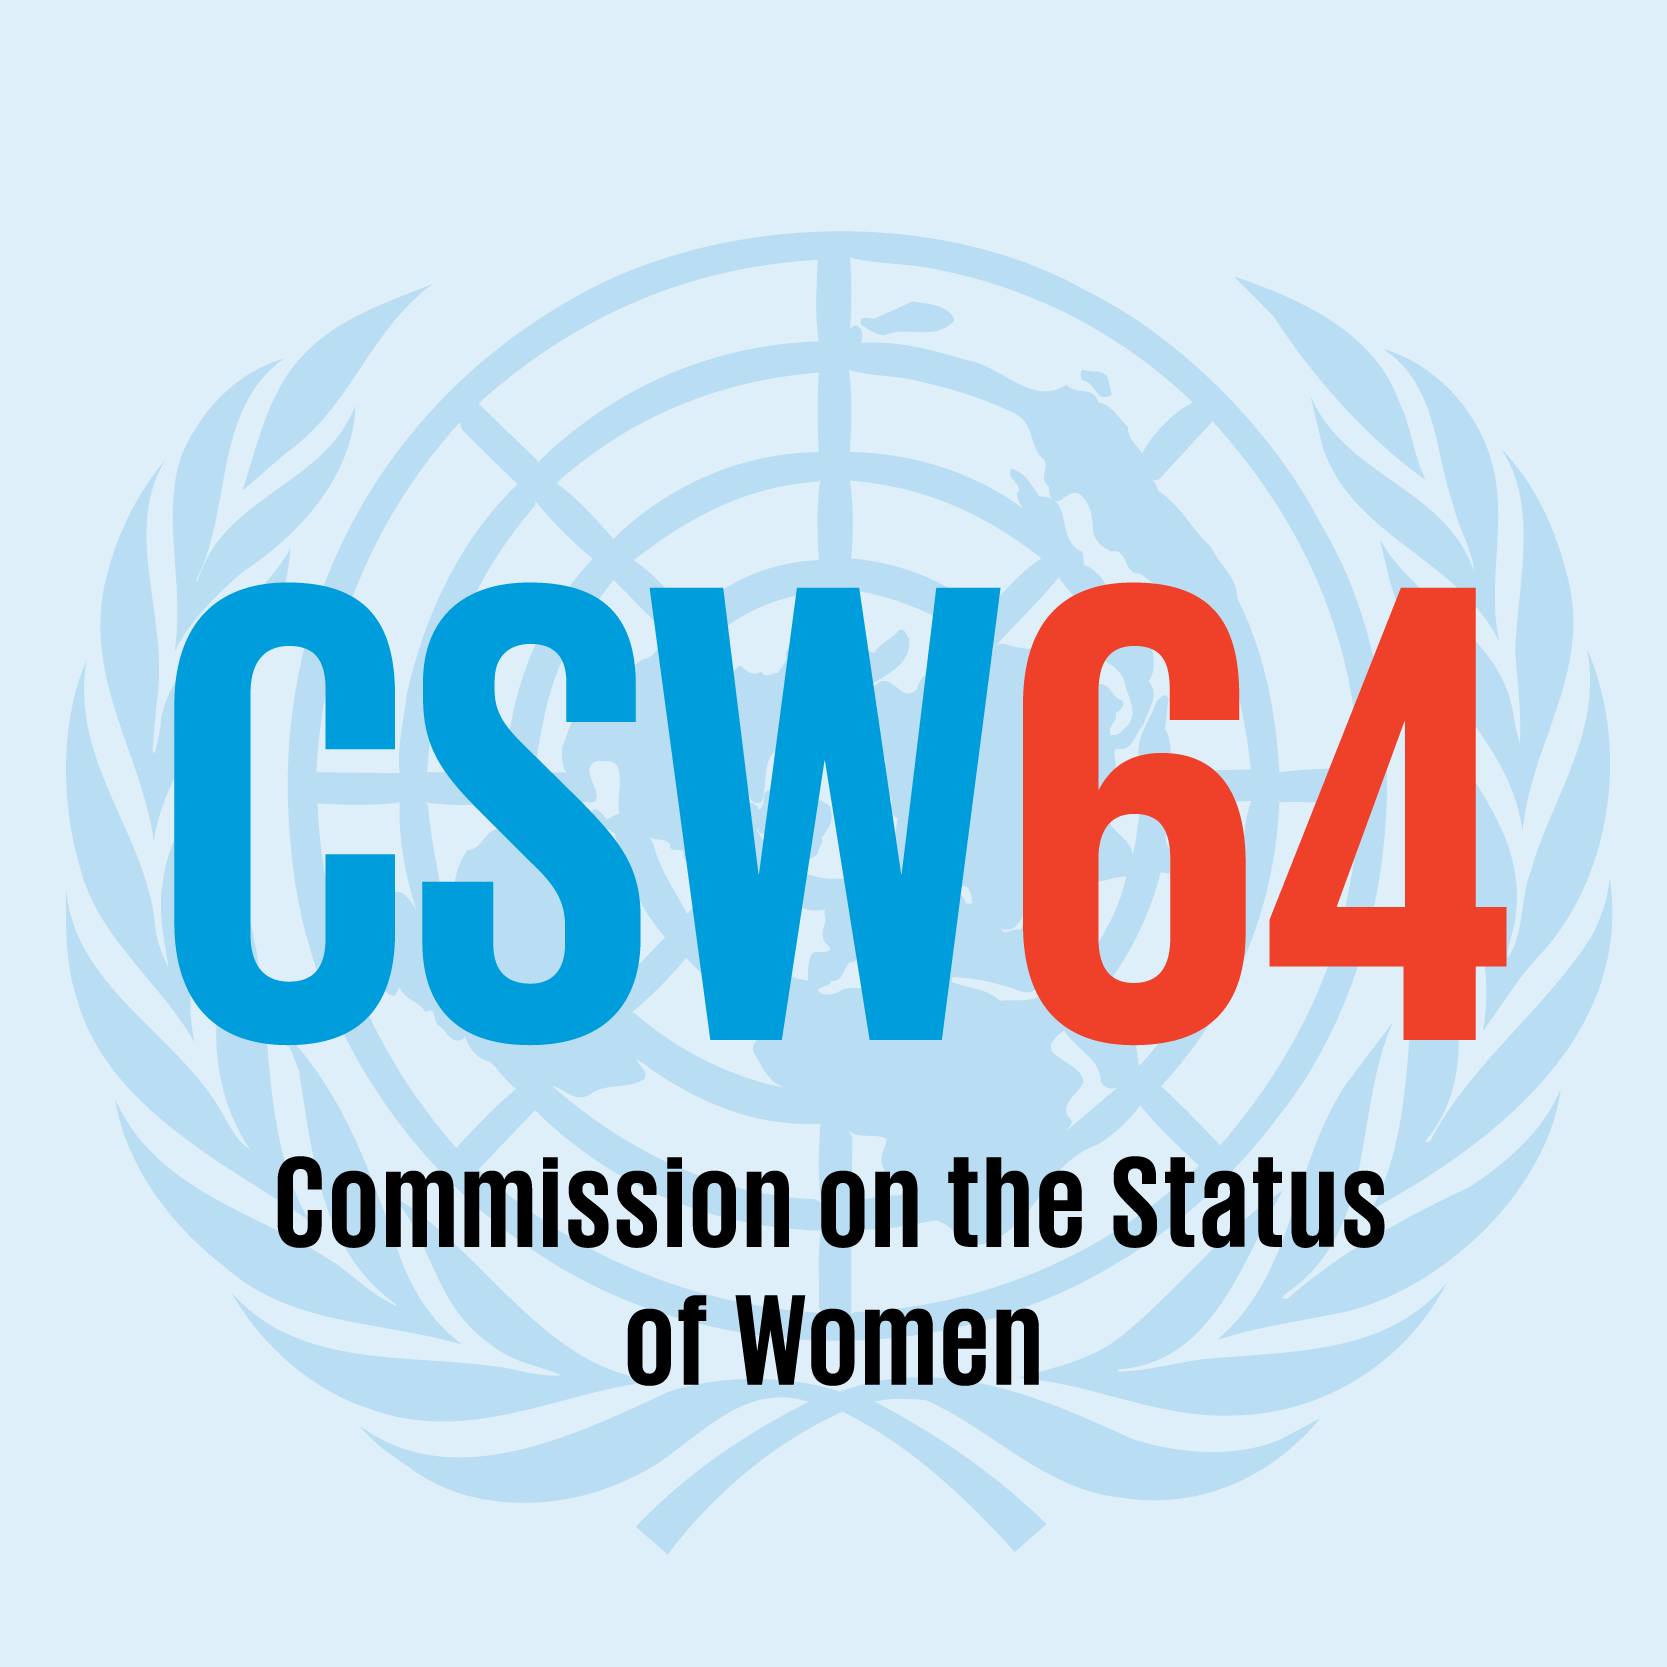 64th session of the Commission on the Status of Women